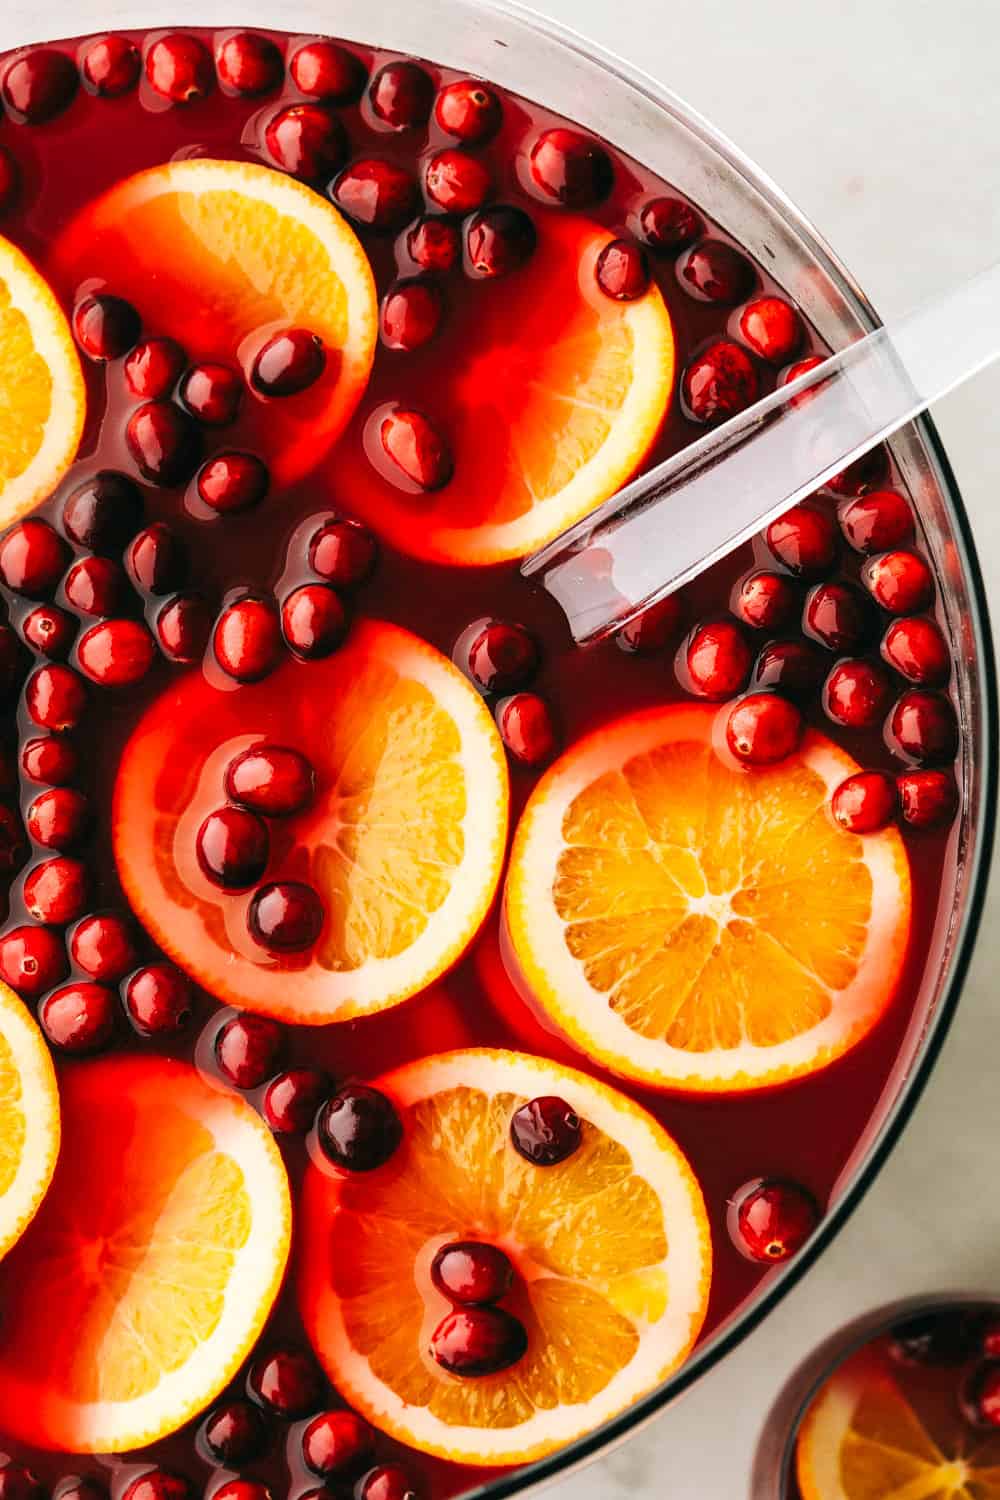 Cranberries and orange slices flavor Christmas punch.